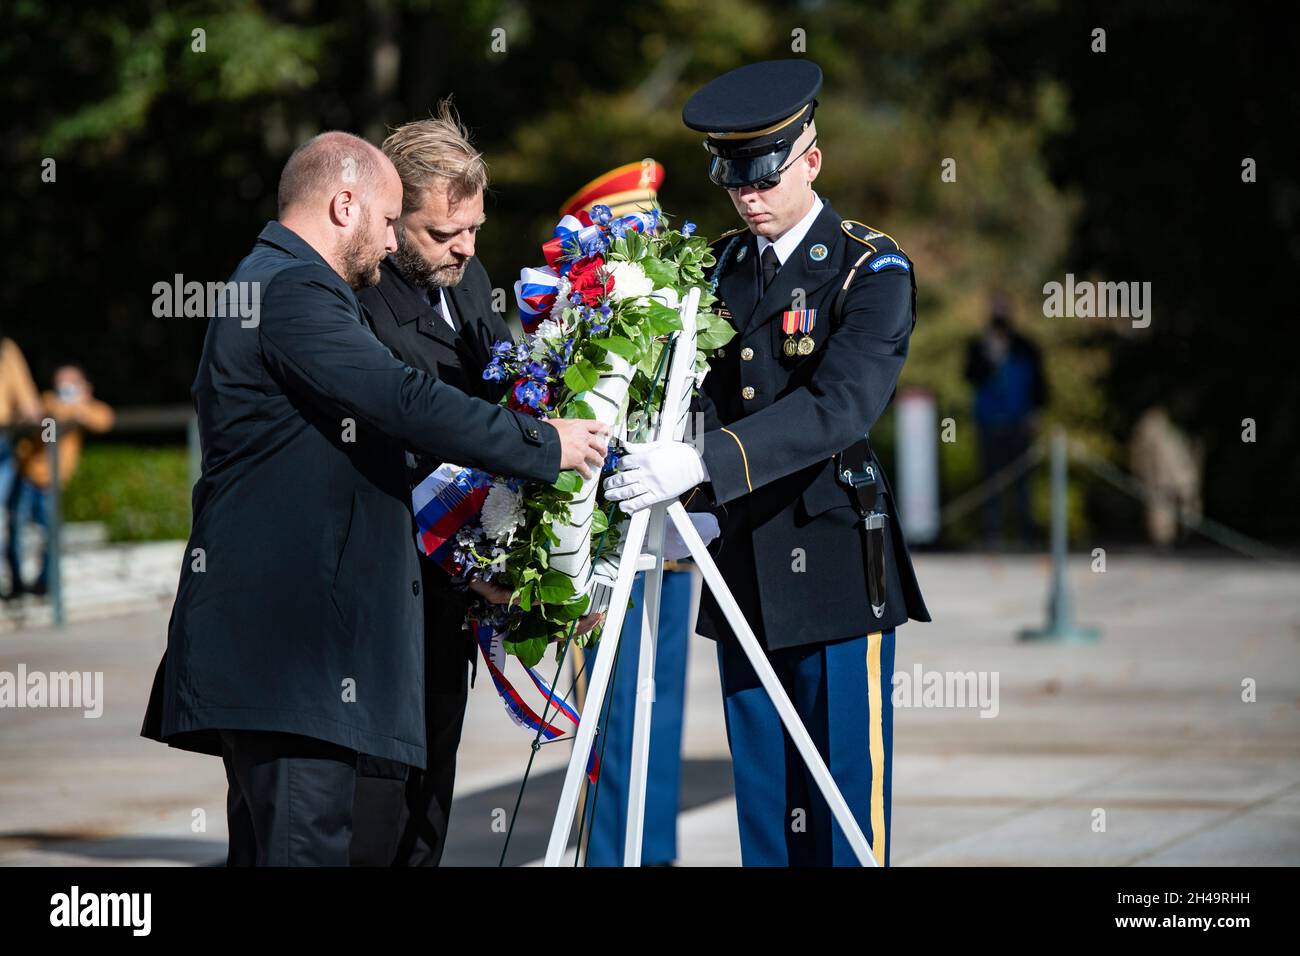 Arlington, United States of America. 26 October, 2021. Slovakian Minister of Defense Jaroslav Nad’, left, and Slovak Parliamentarian Juraj Krúpa, center, place a wreath at the Tomb of the Unknown Soldier at Arlington National Cemetery, October 26, 2021 in Arlington, Virginia. Credit: Elizabeth Fraser/DOD/Alamy Live News Stock Photo